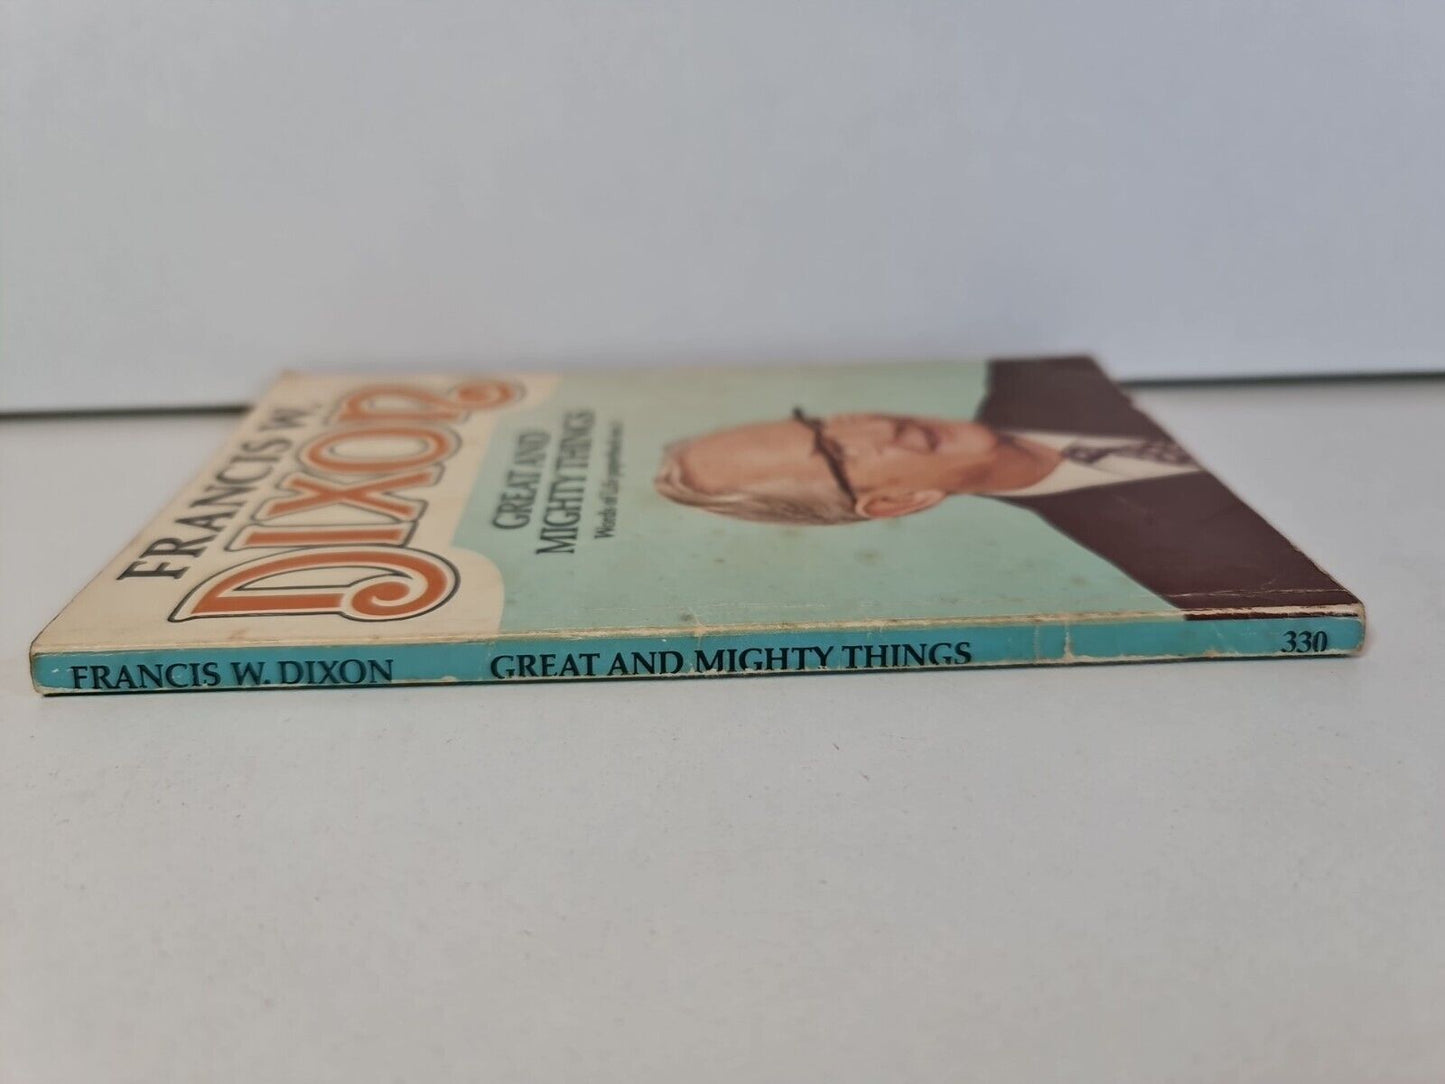 Great and Mighty Things by Francis W. Dixon (1976)